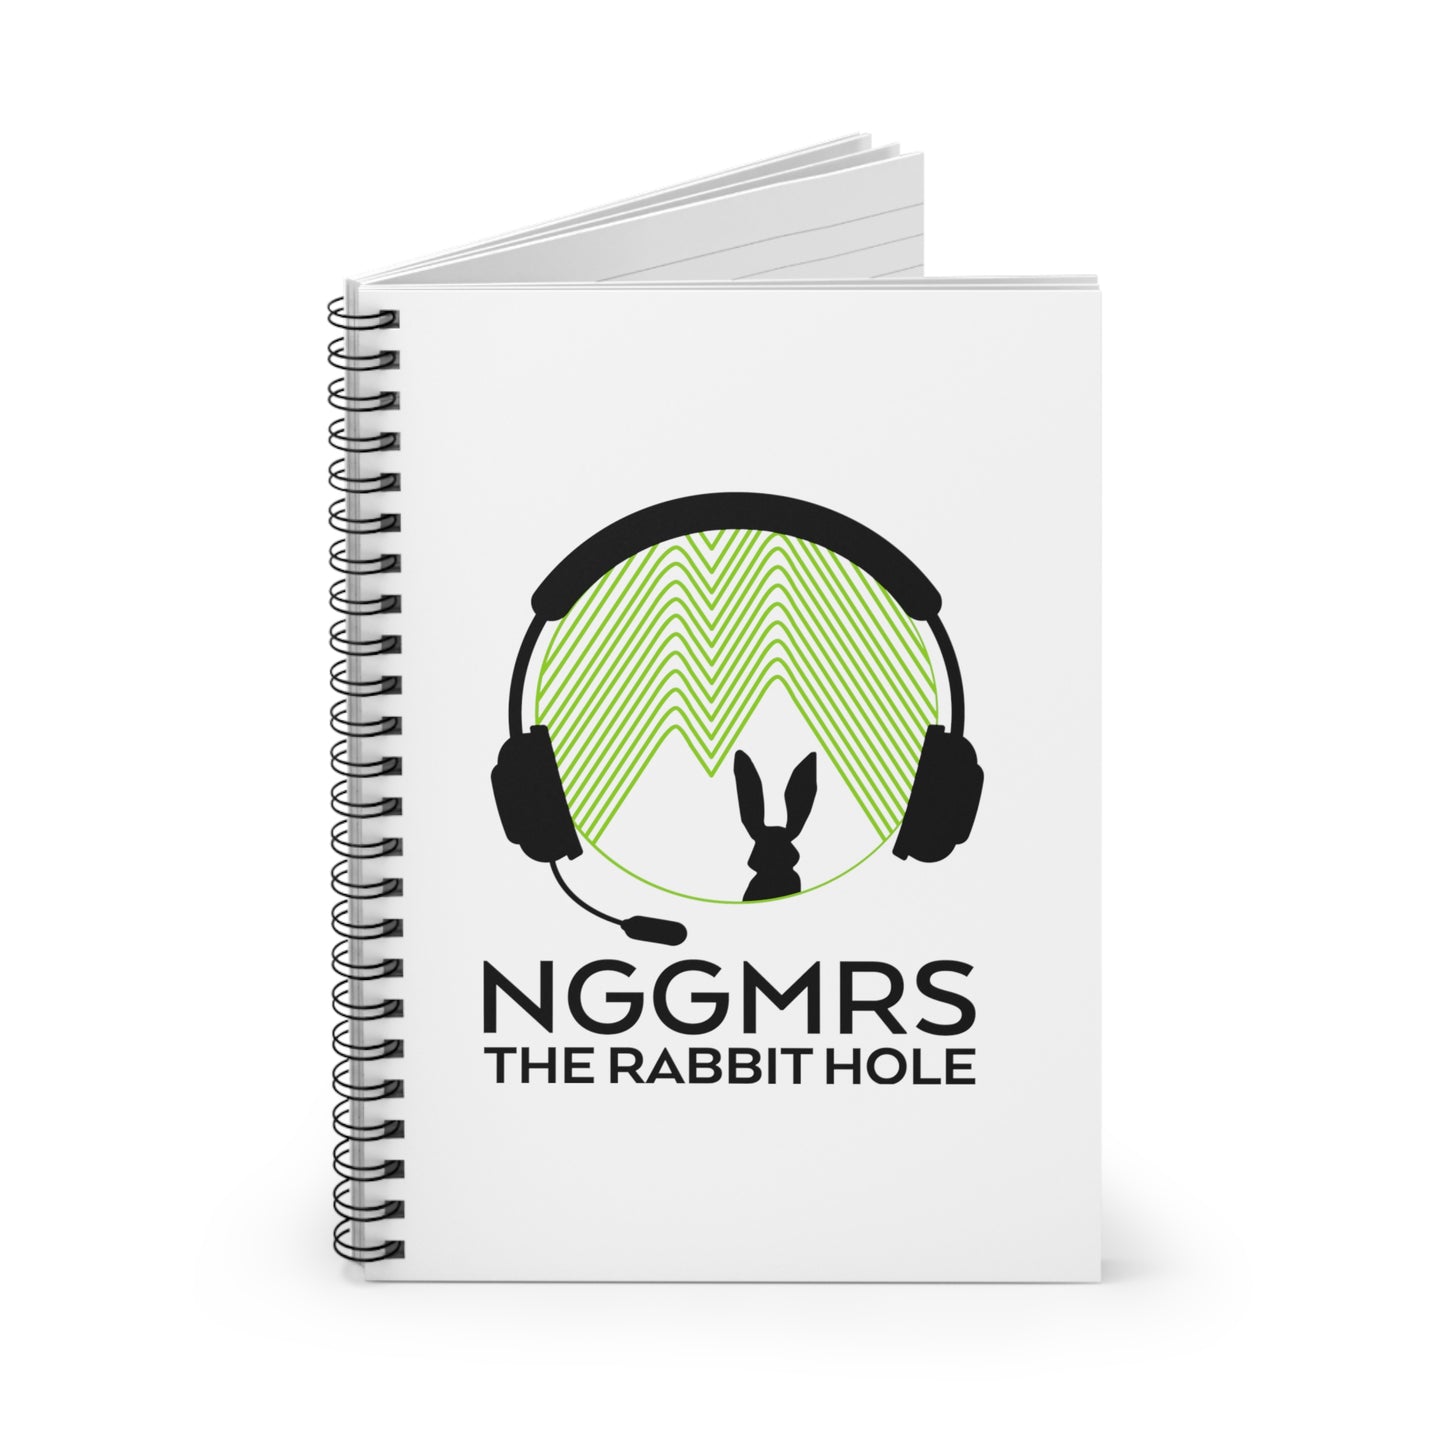 White Spiral Notebook - Ruled Line - Rabbit Hole